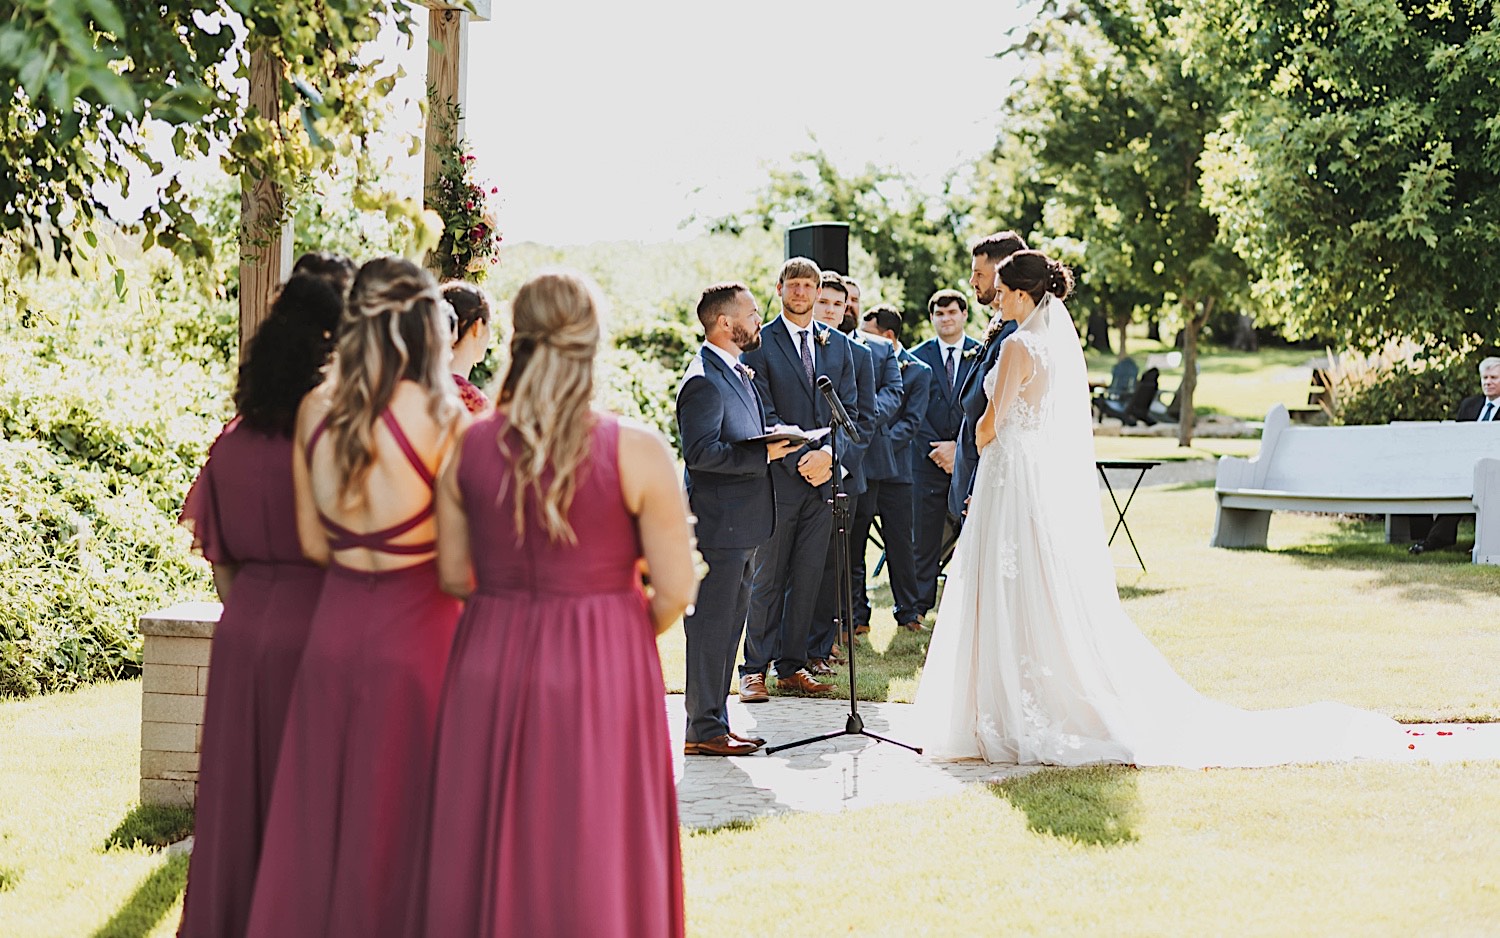 A bride and groom stand during their outdoor wedding ceremony at Legacy Hill Farm while their wedding parties watch on either side of them